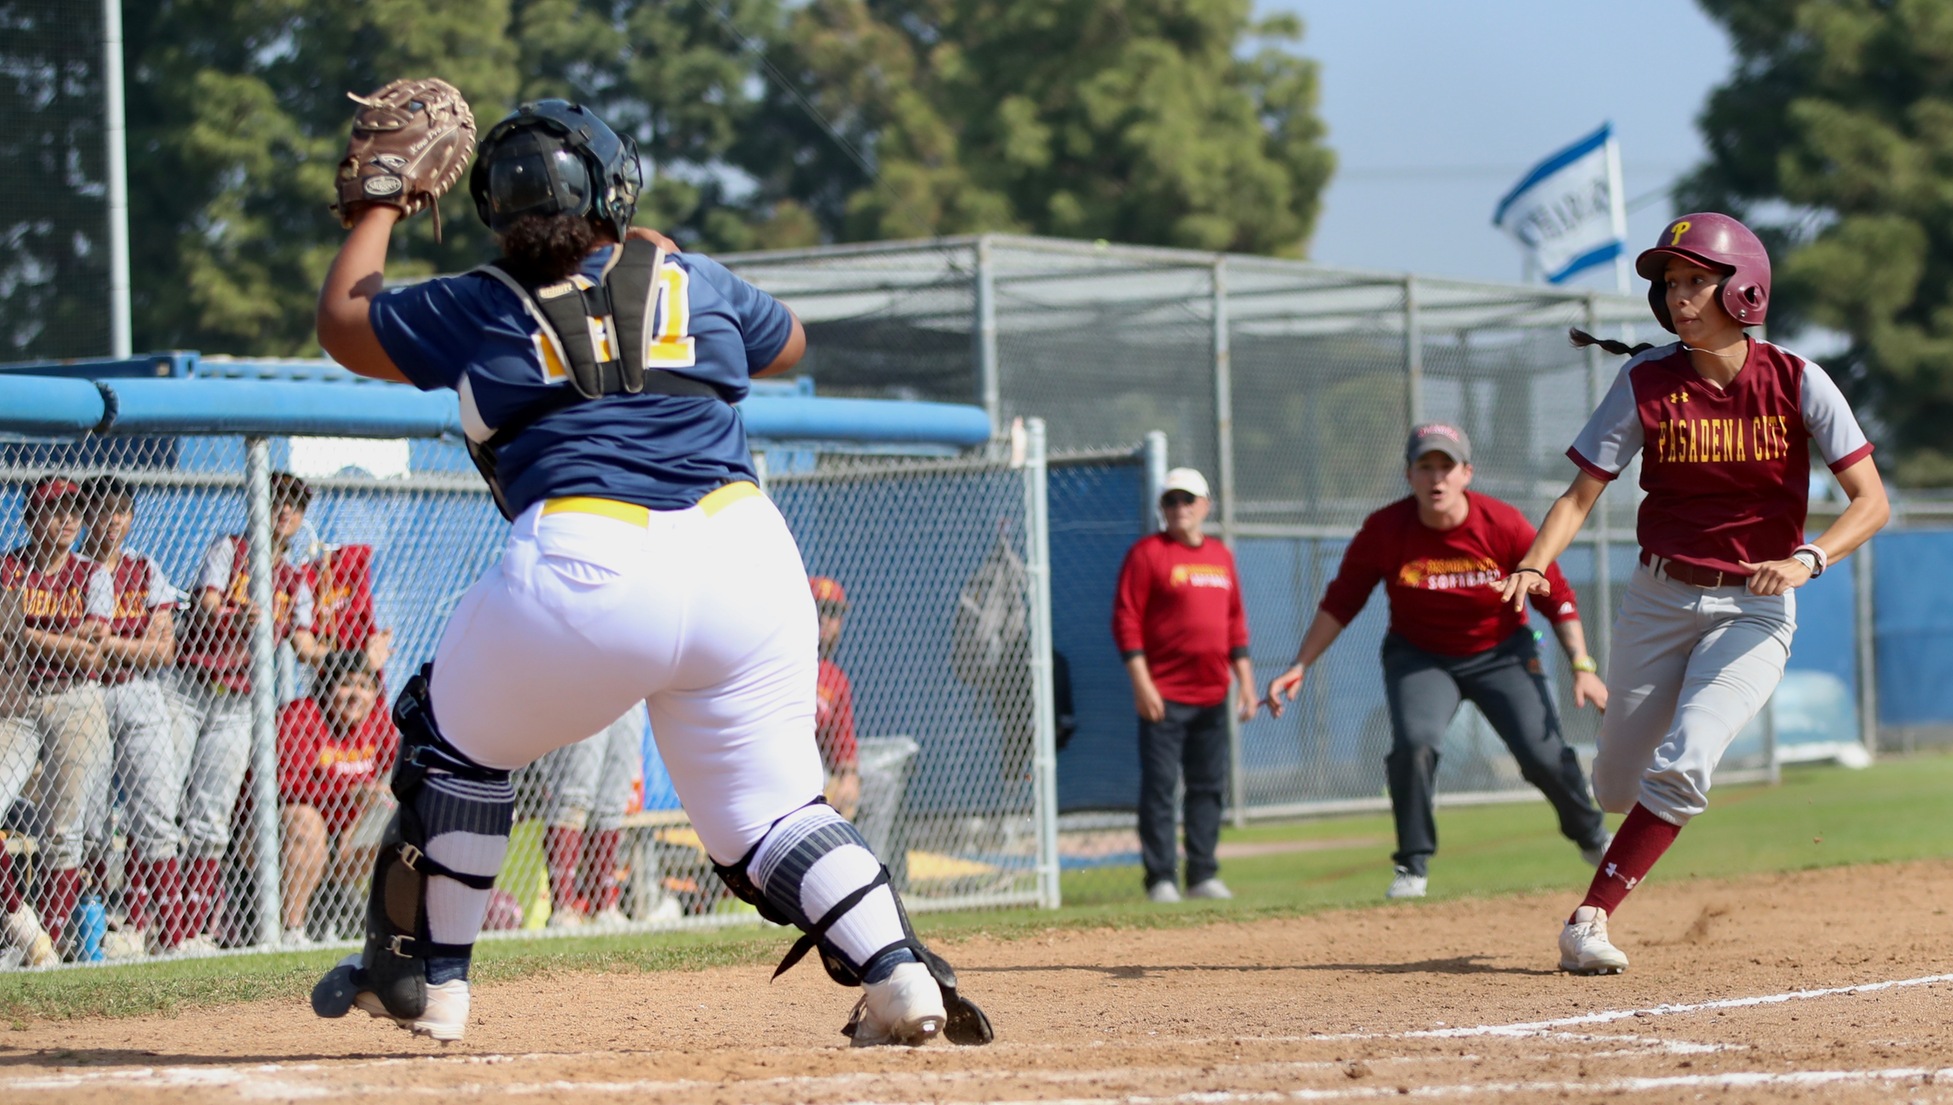 Lancer runner Valley Febles scores on this play with head coach Monica Tantlinger looking on from third base coaches box during PCC's 7-6 win over SD Mesa at Cypress College on Saturday, photo by Michael Watkins.